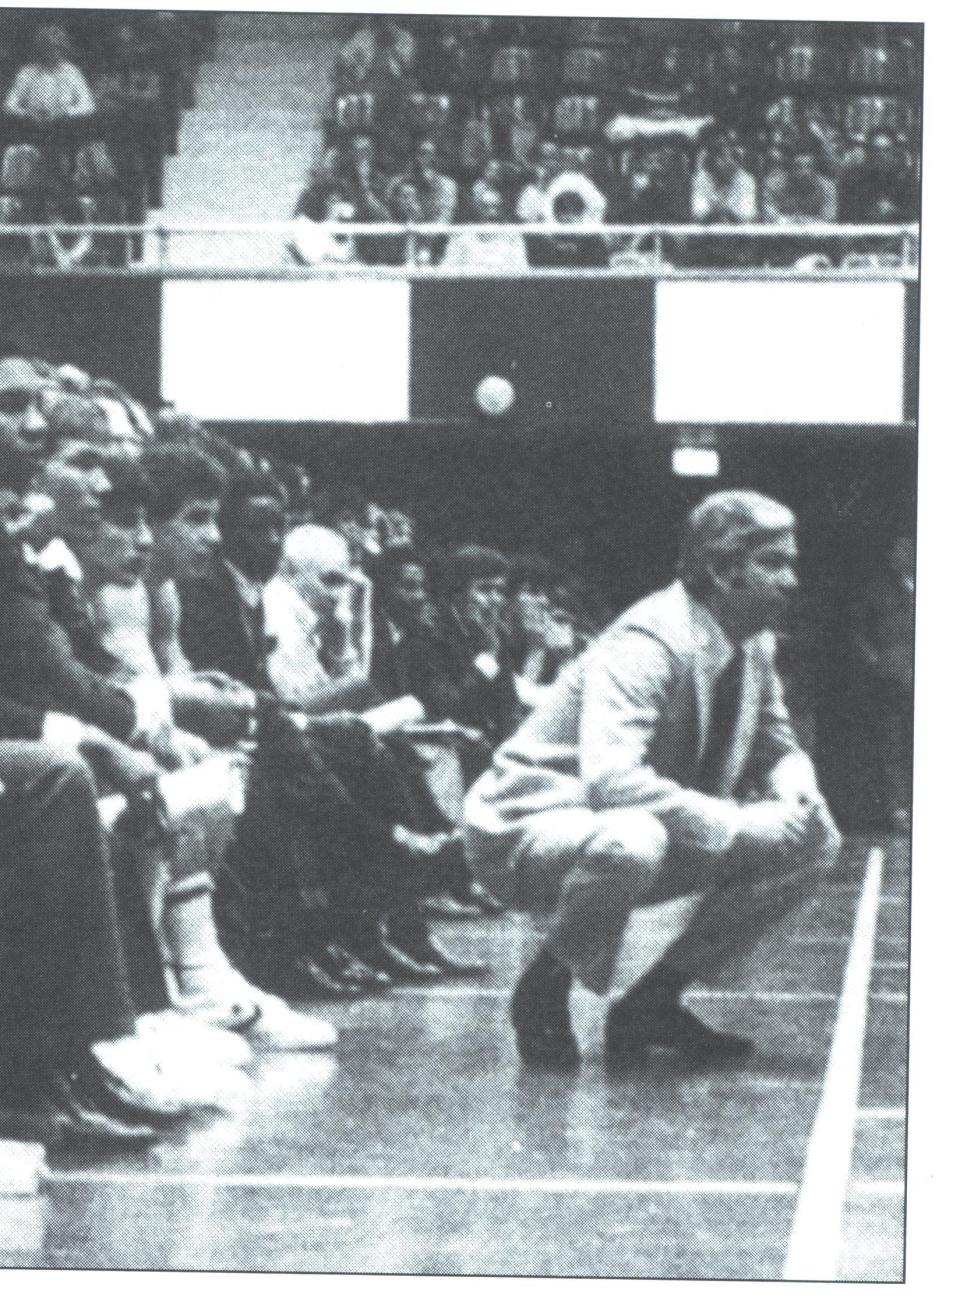 Bill Raftery coaching Seton Hall in Walsh Gym in an undated photo